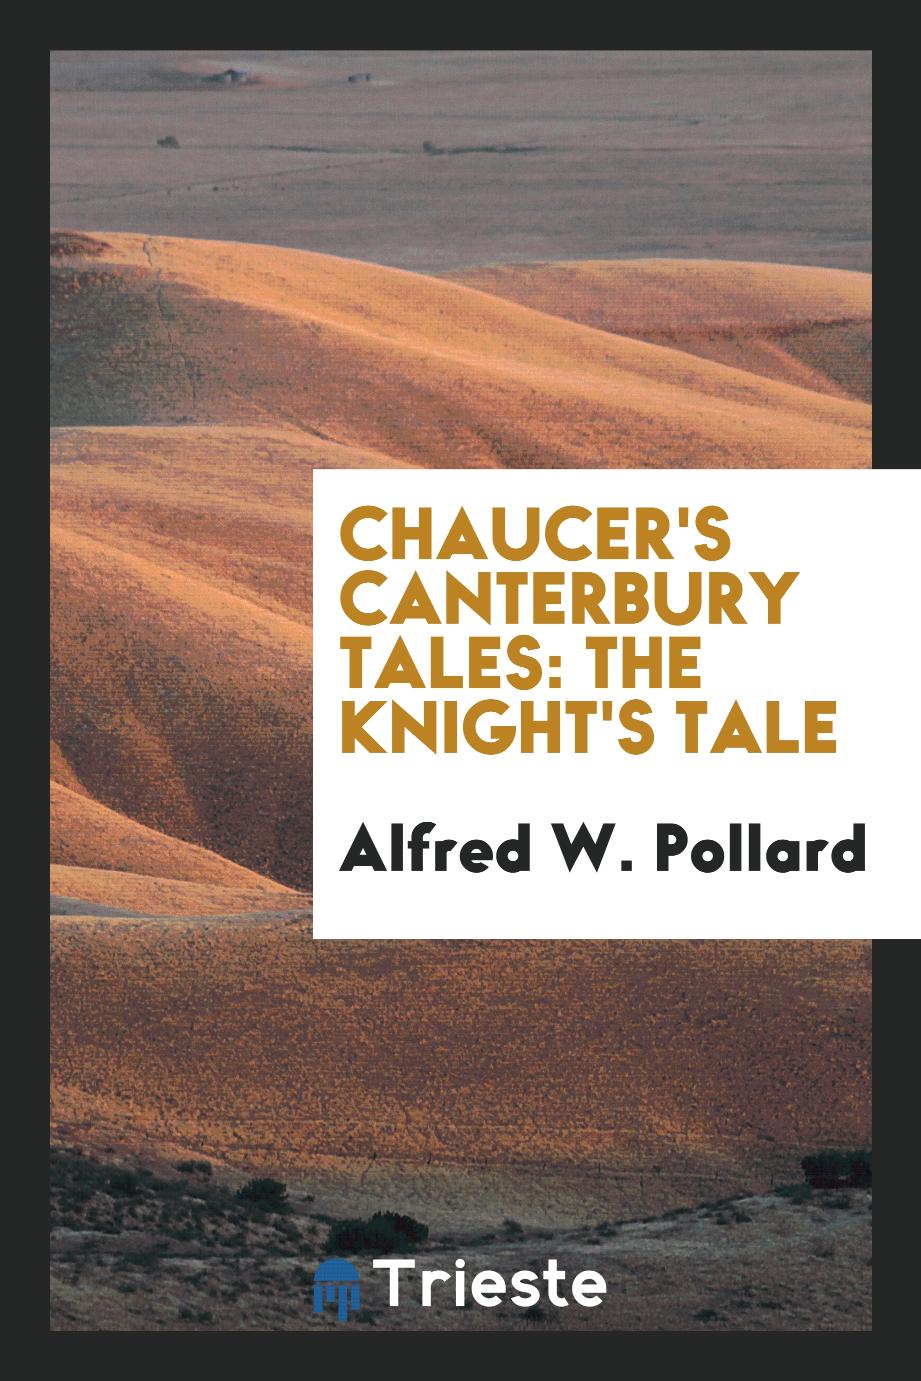 Chaucer's Canterbury Tales: The knight's tale